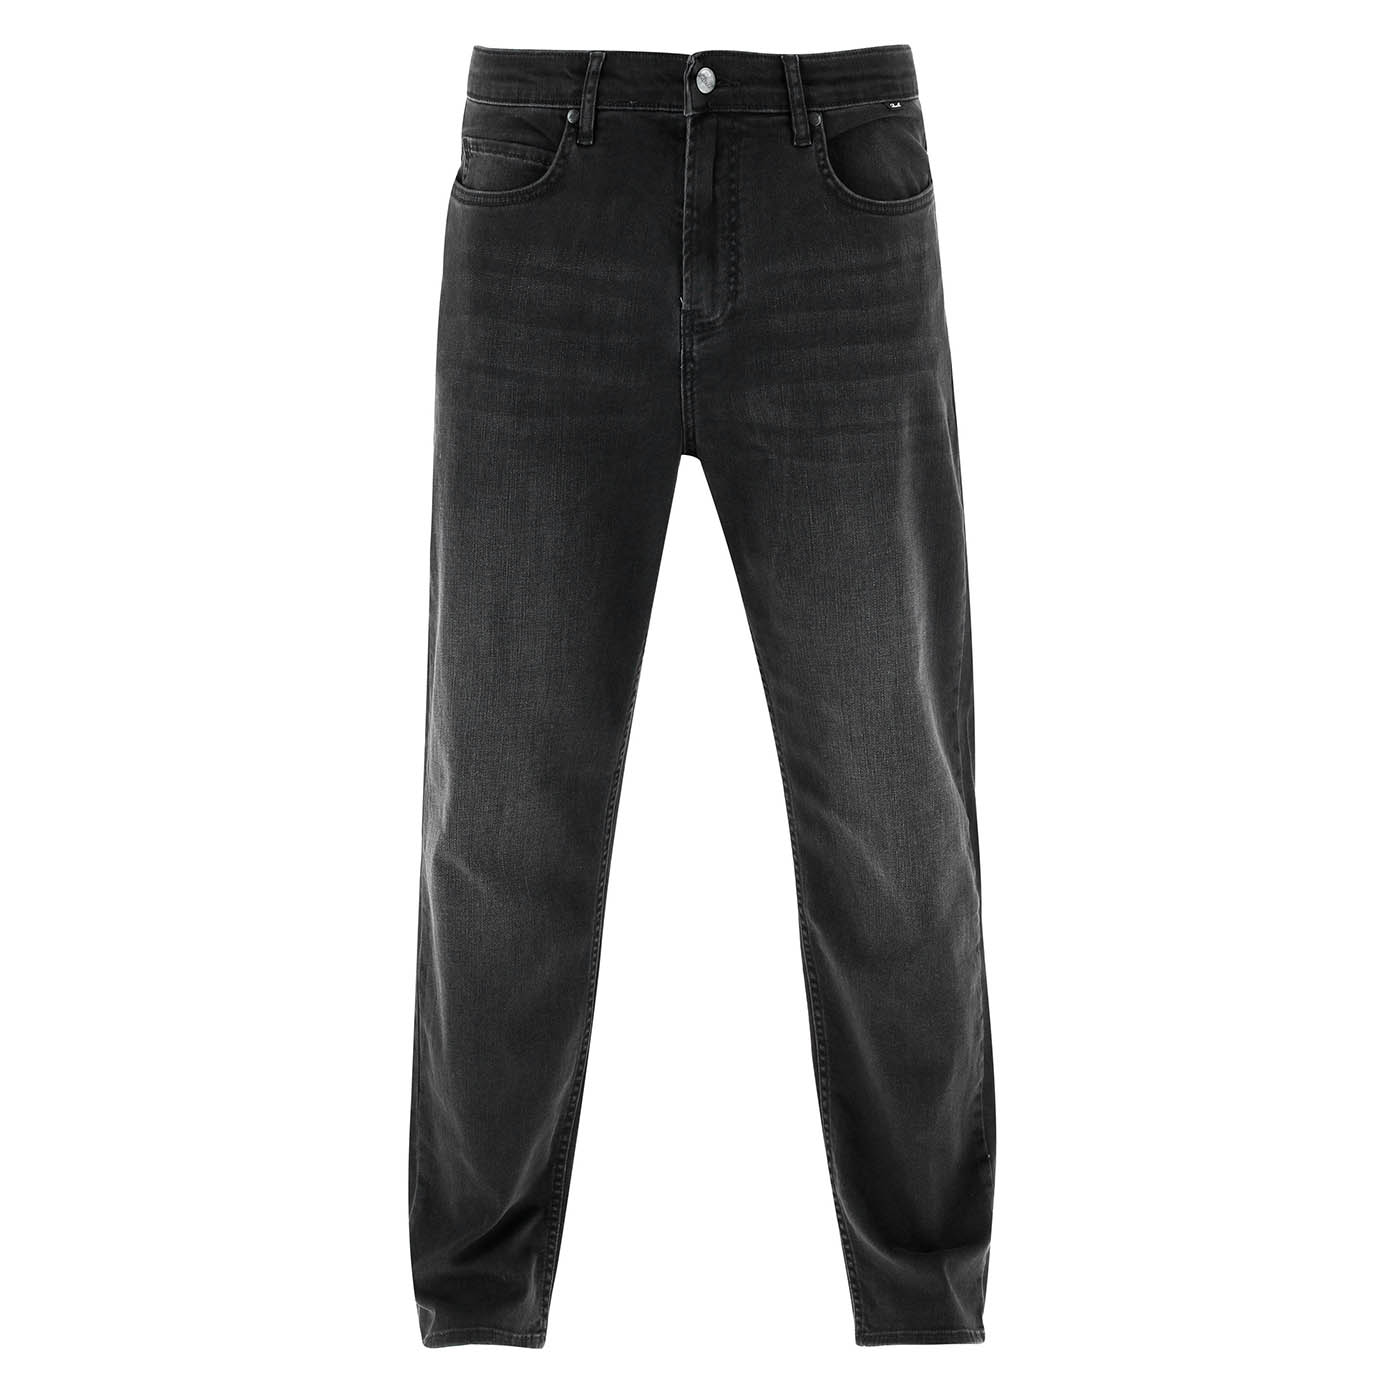 Reell Jeans Rave Tapered Fit Jeans Black Wash 